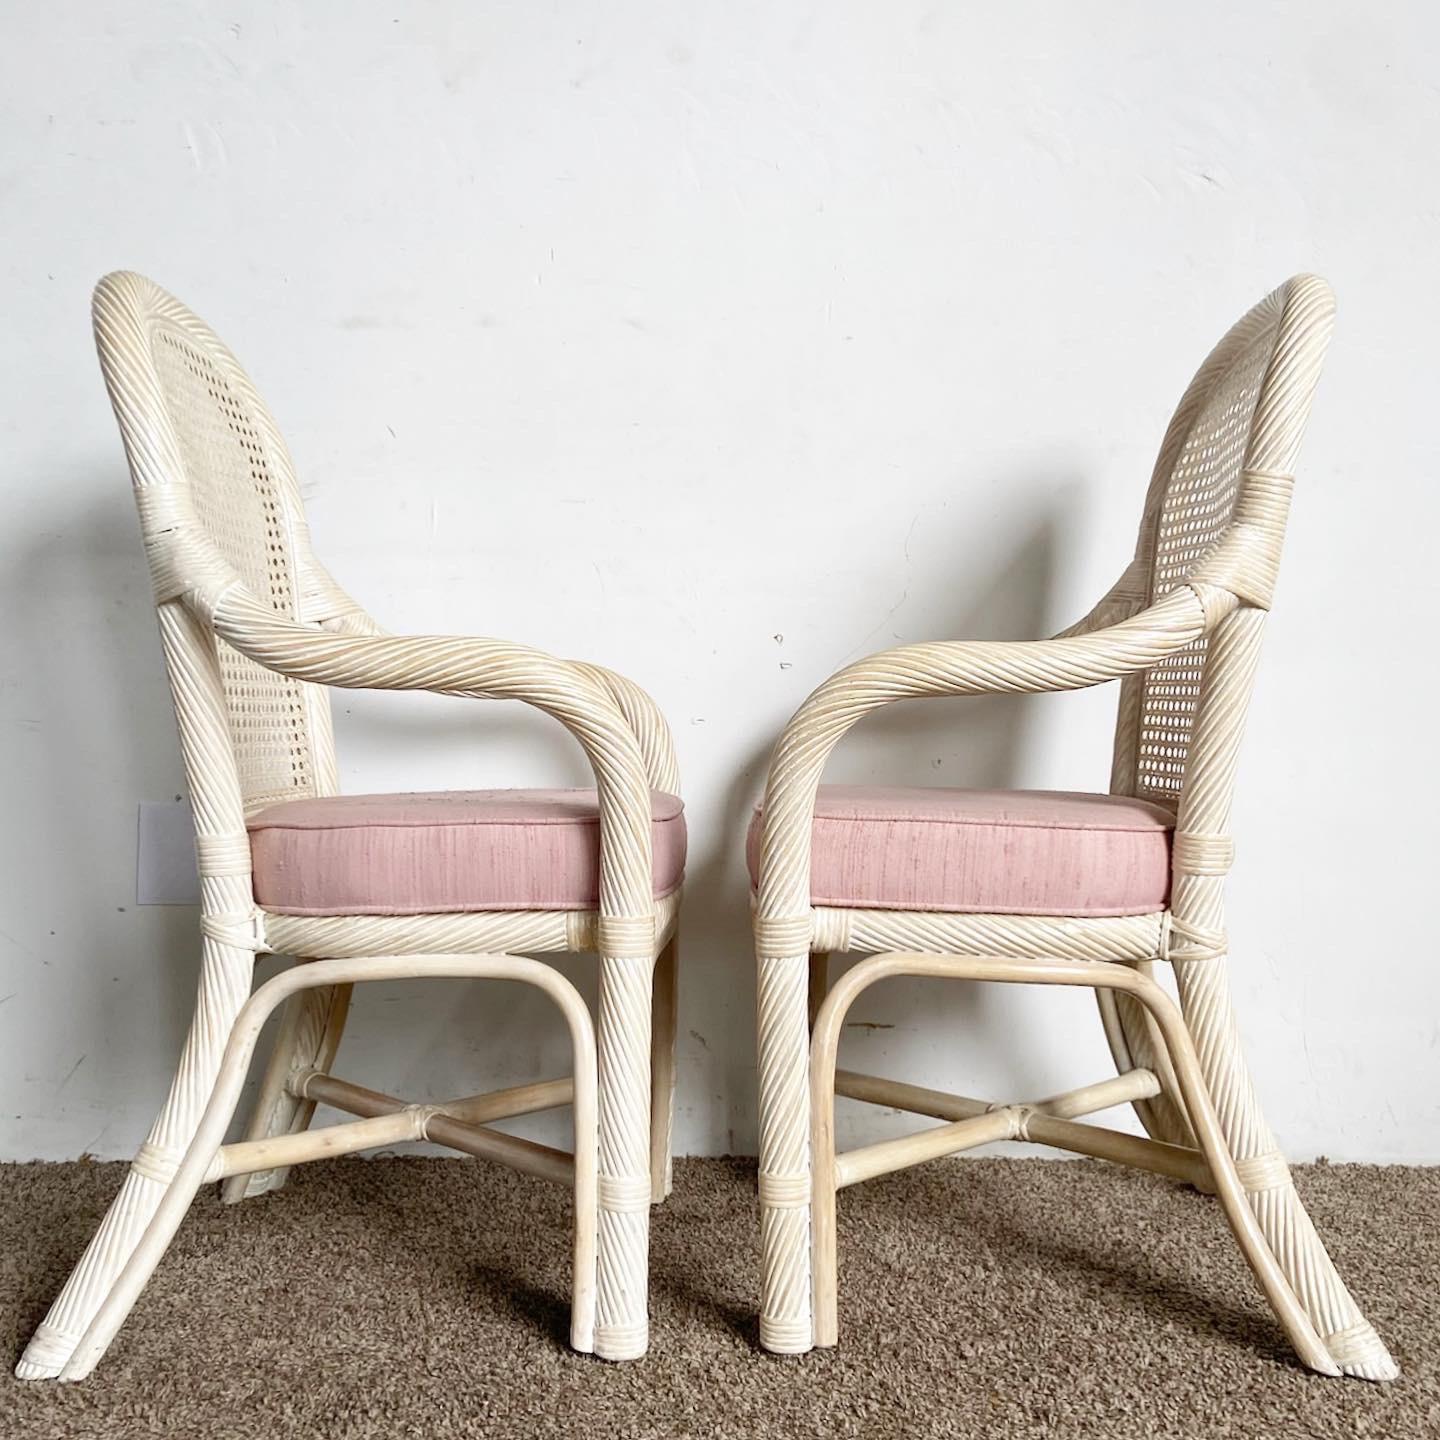 Bohemian Boho Chic Twisted Pencil Reed Cane Back Dining Arm Chairs With Pink Cushions For Sale